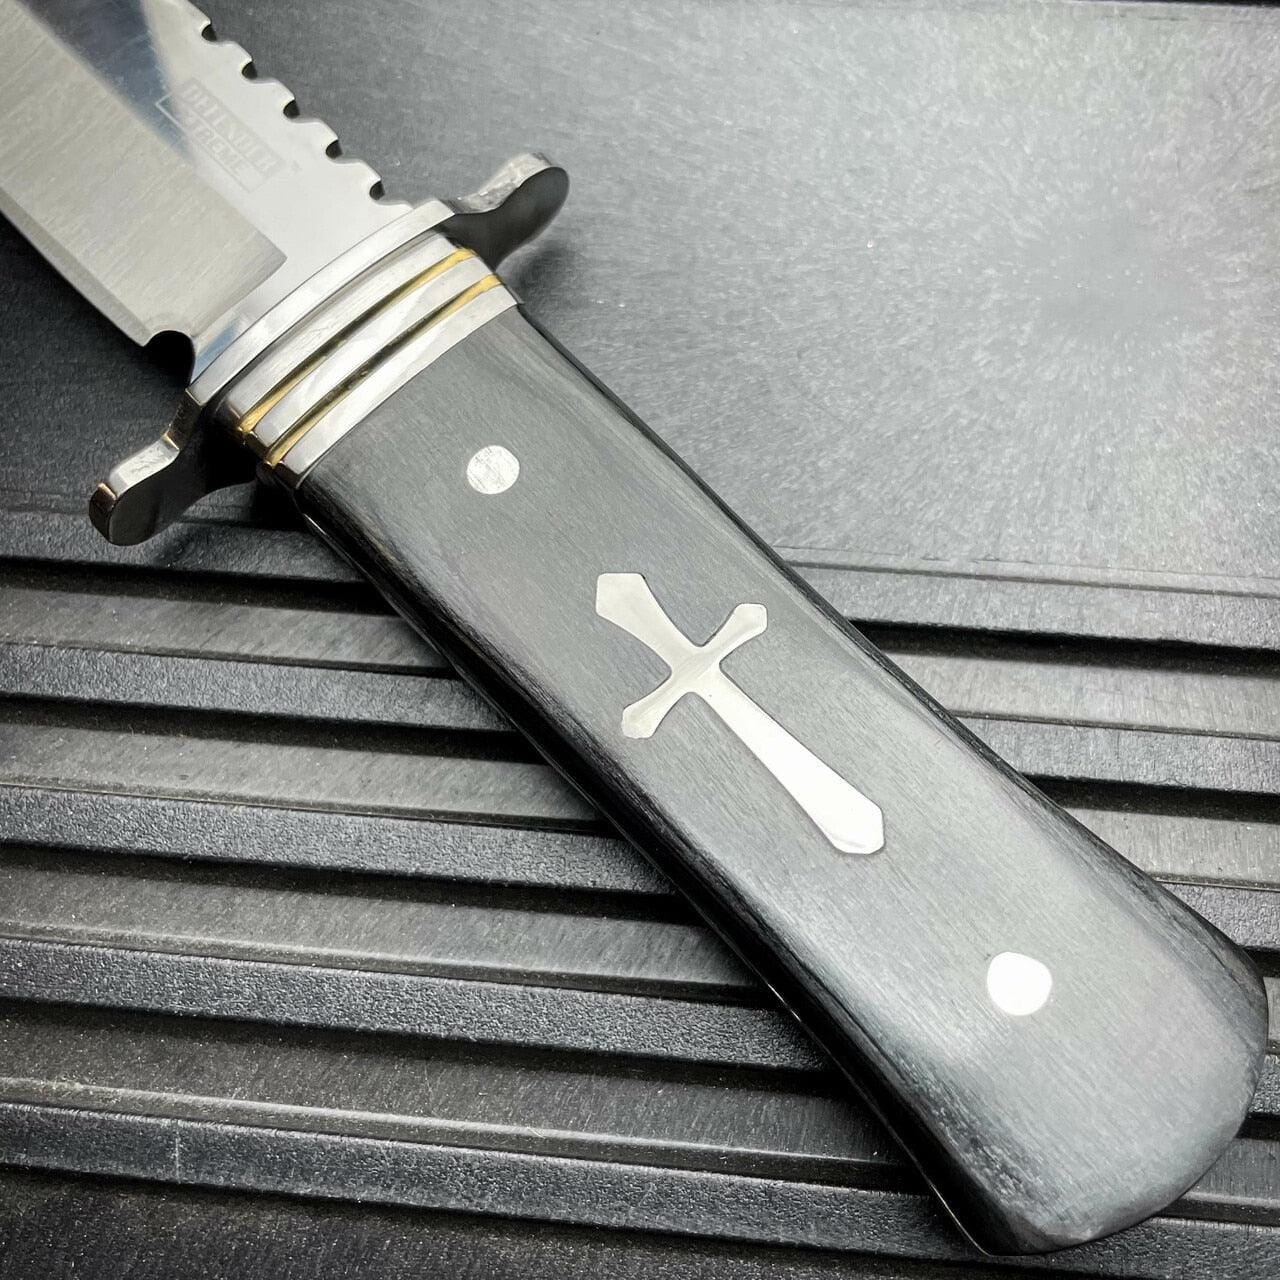 11 STAINLESS STEEL CELTIC CROSS HUNTING KNIFE WOOD HANDLE Gothic Skin